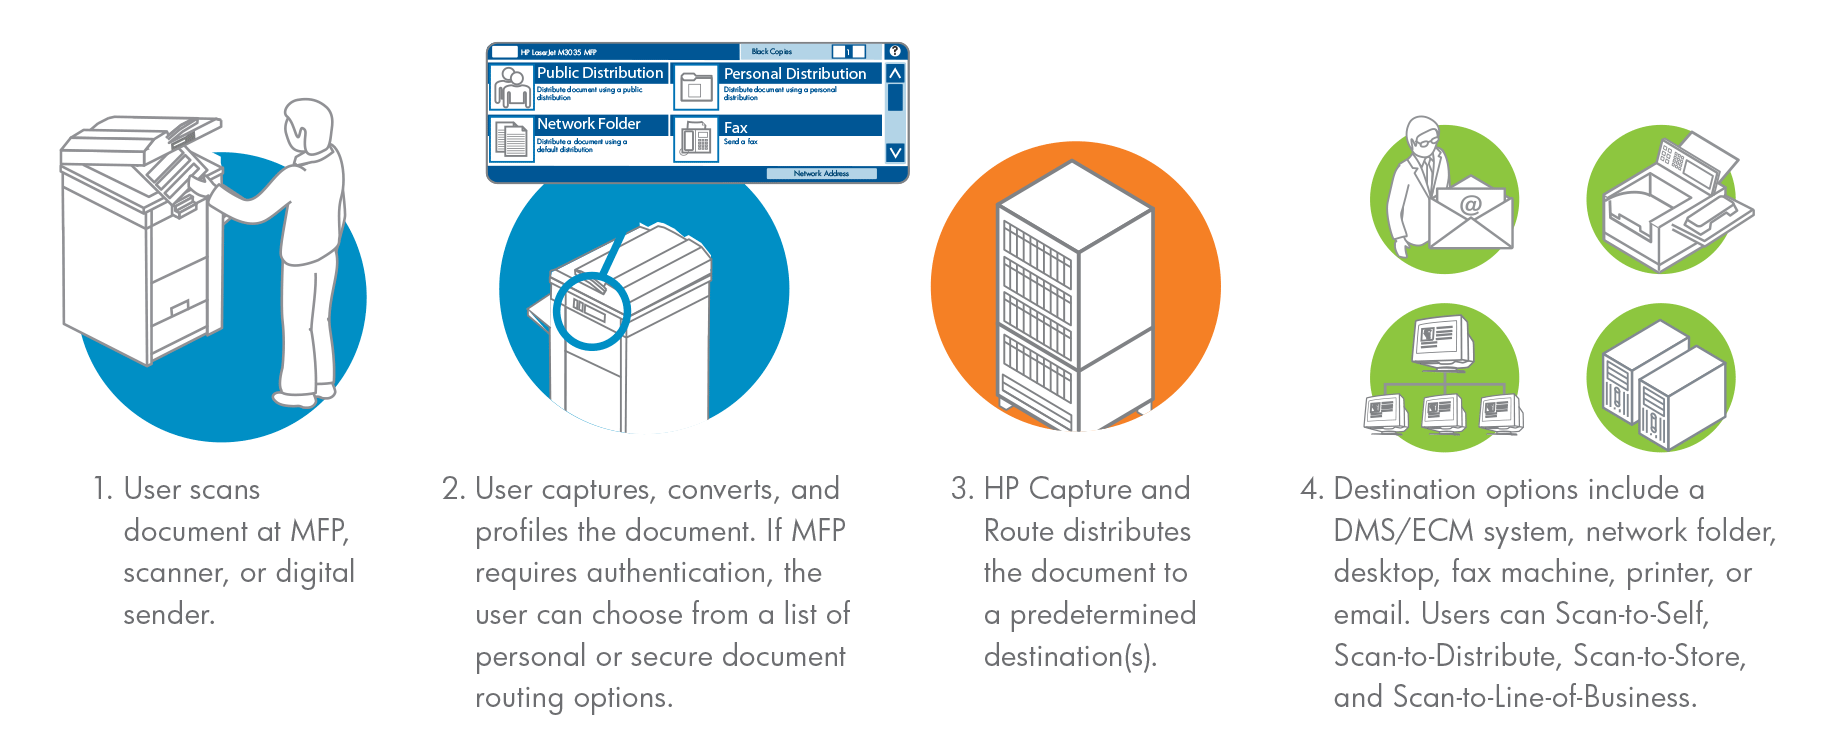 document scanning made simple to increase productivity